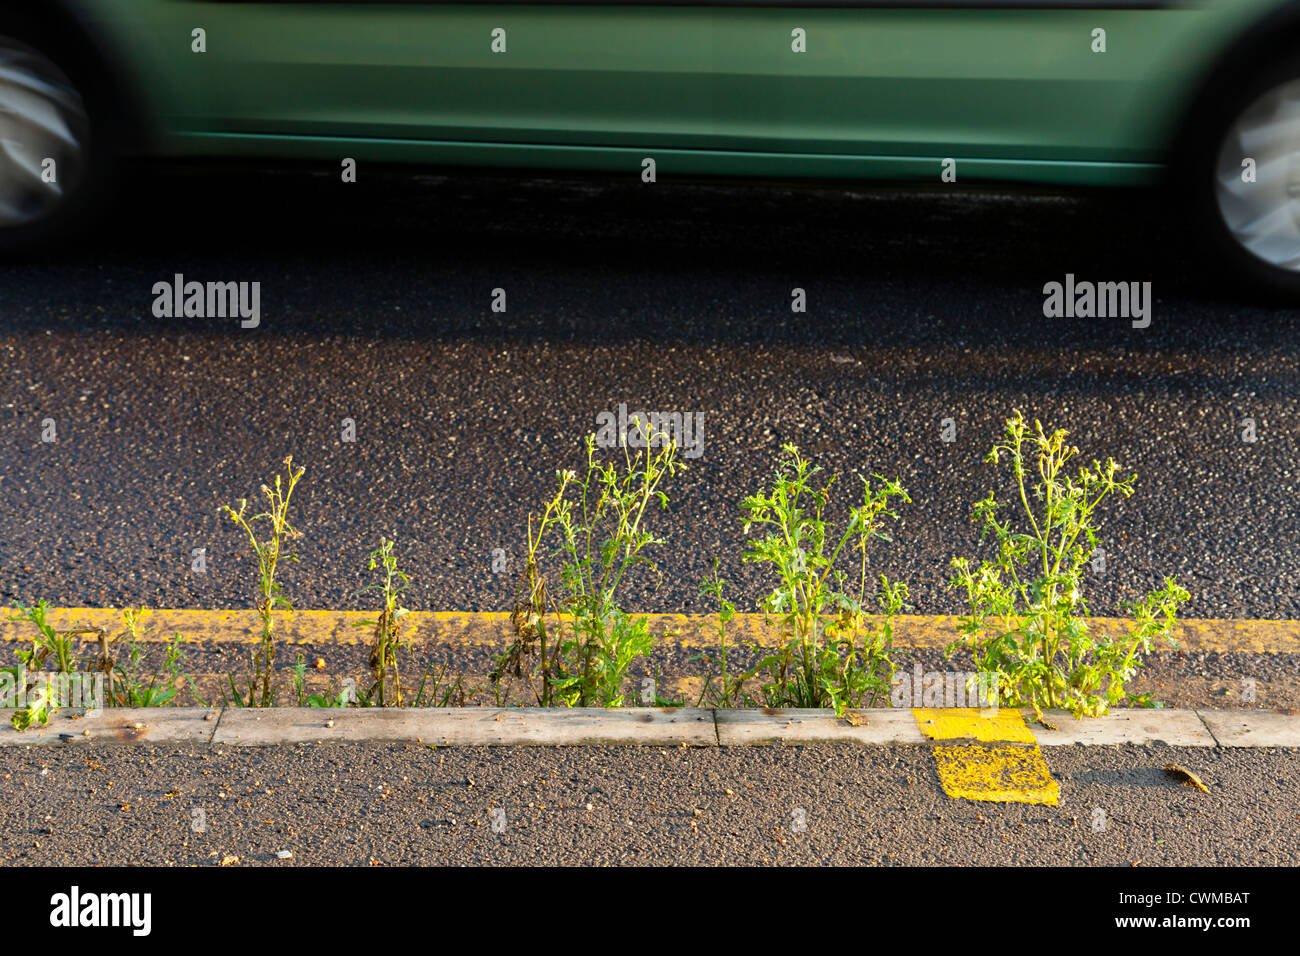 Roadside weeds. Kerb with weed growing on a main road with a car passing by, England, UK Stock Photo